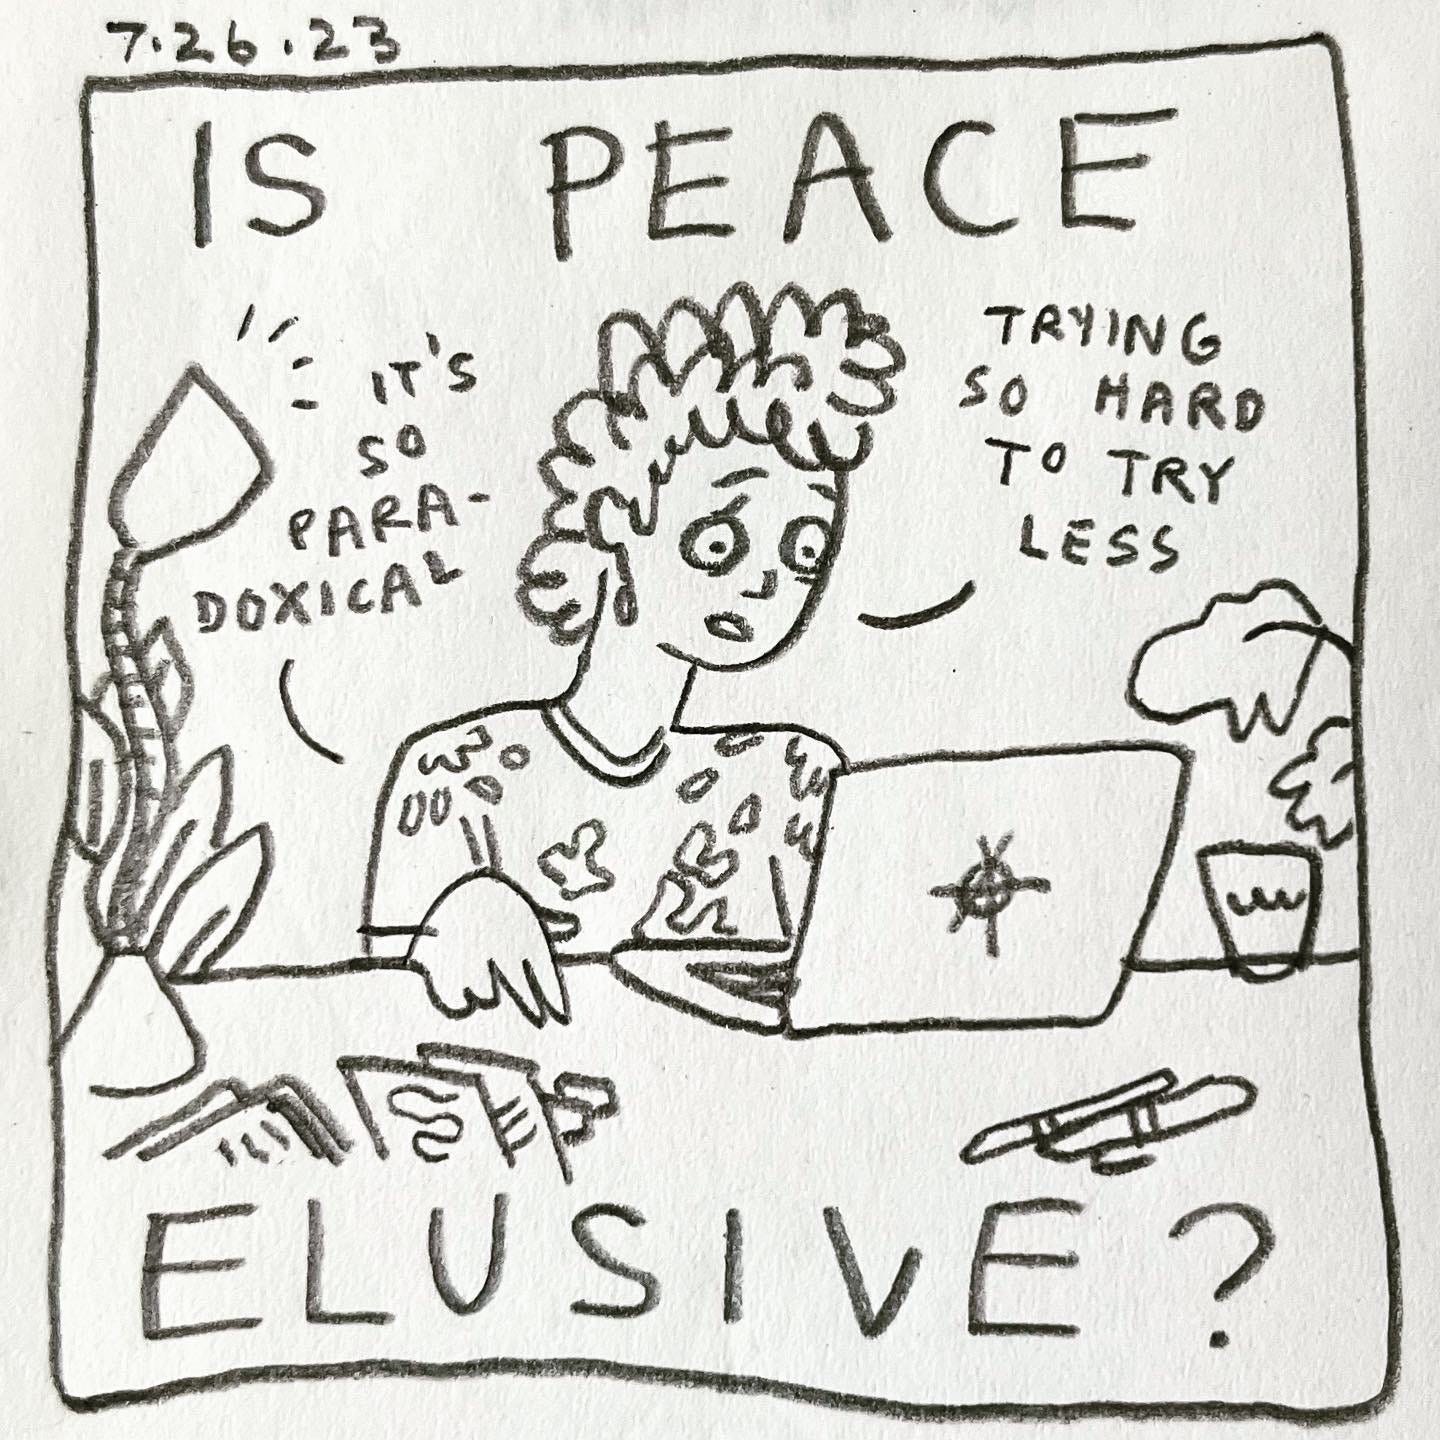 Panel 1: is peace elusive? Image: a worried Lark sits at their open laptop. A lamp, a glass of water, pens and paper are scattered on the desk, and house plants are behind them. Lark speaks into their computer, "it's so paradoxical. Trying so hard to try less"